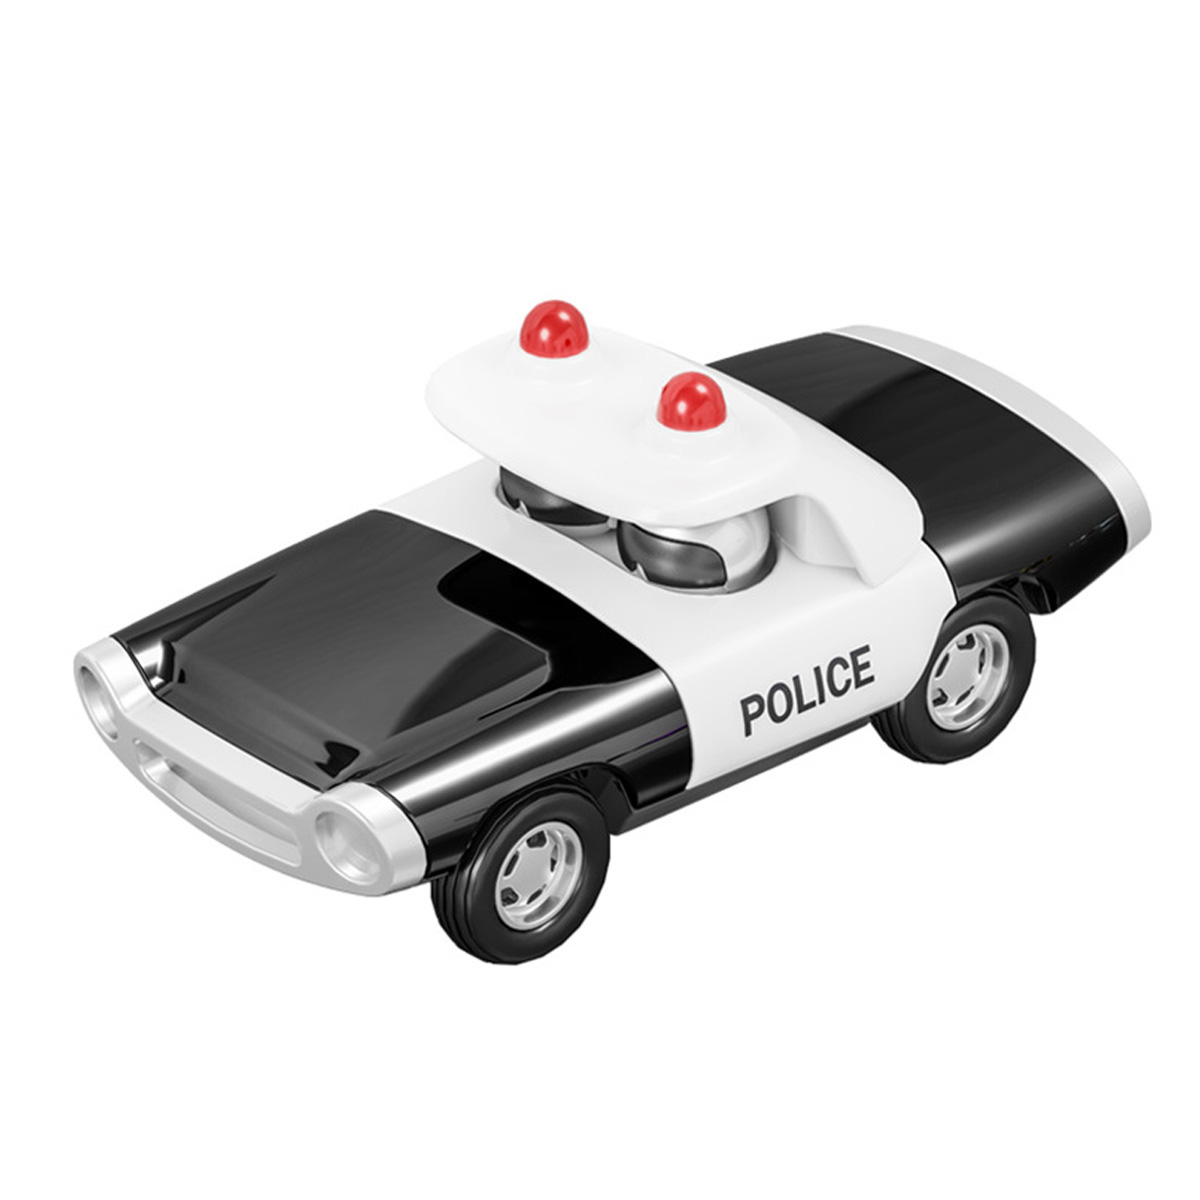 Alloy-Police-Pull-Back-Diecast-Car-Model-Toy-for-Gift-Collection-Home-Decoration-1734360-4